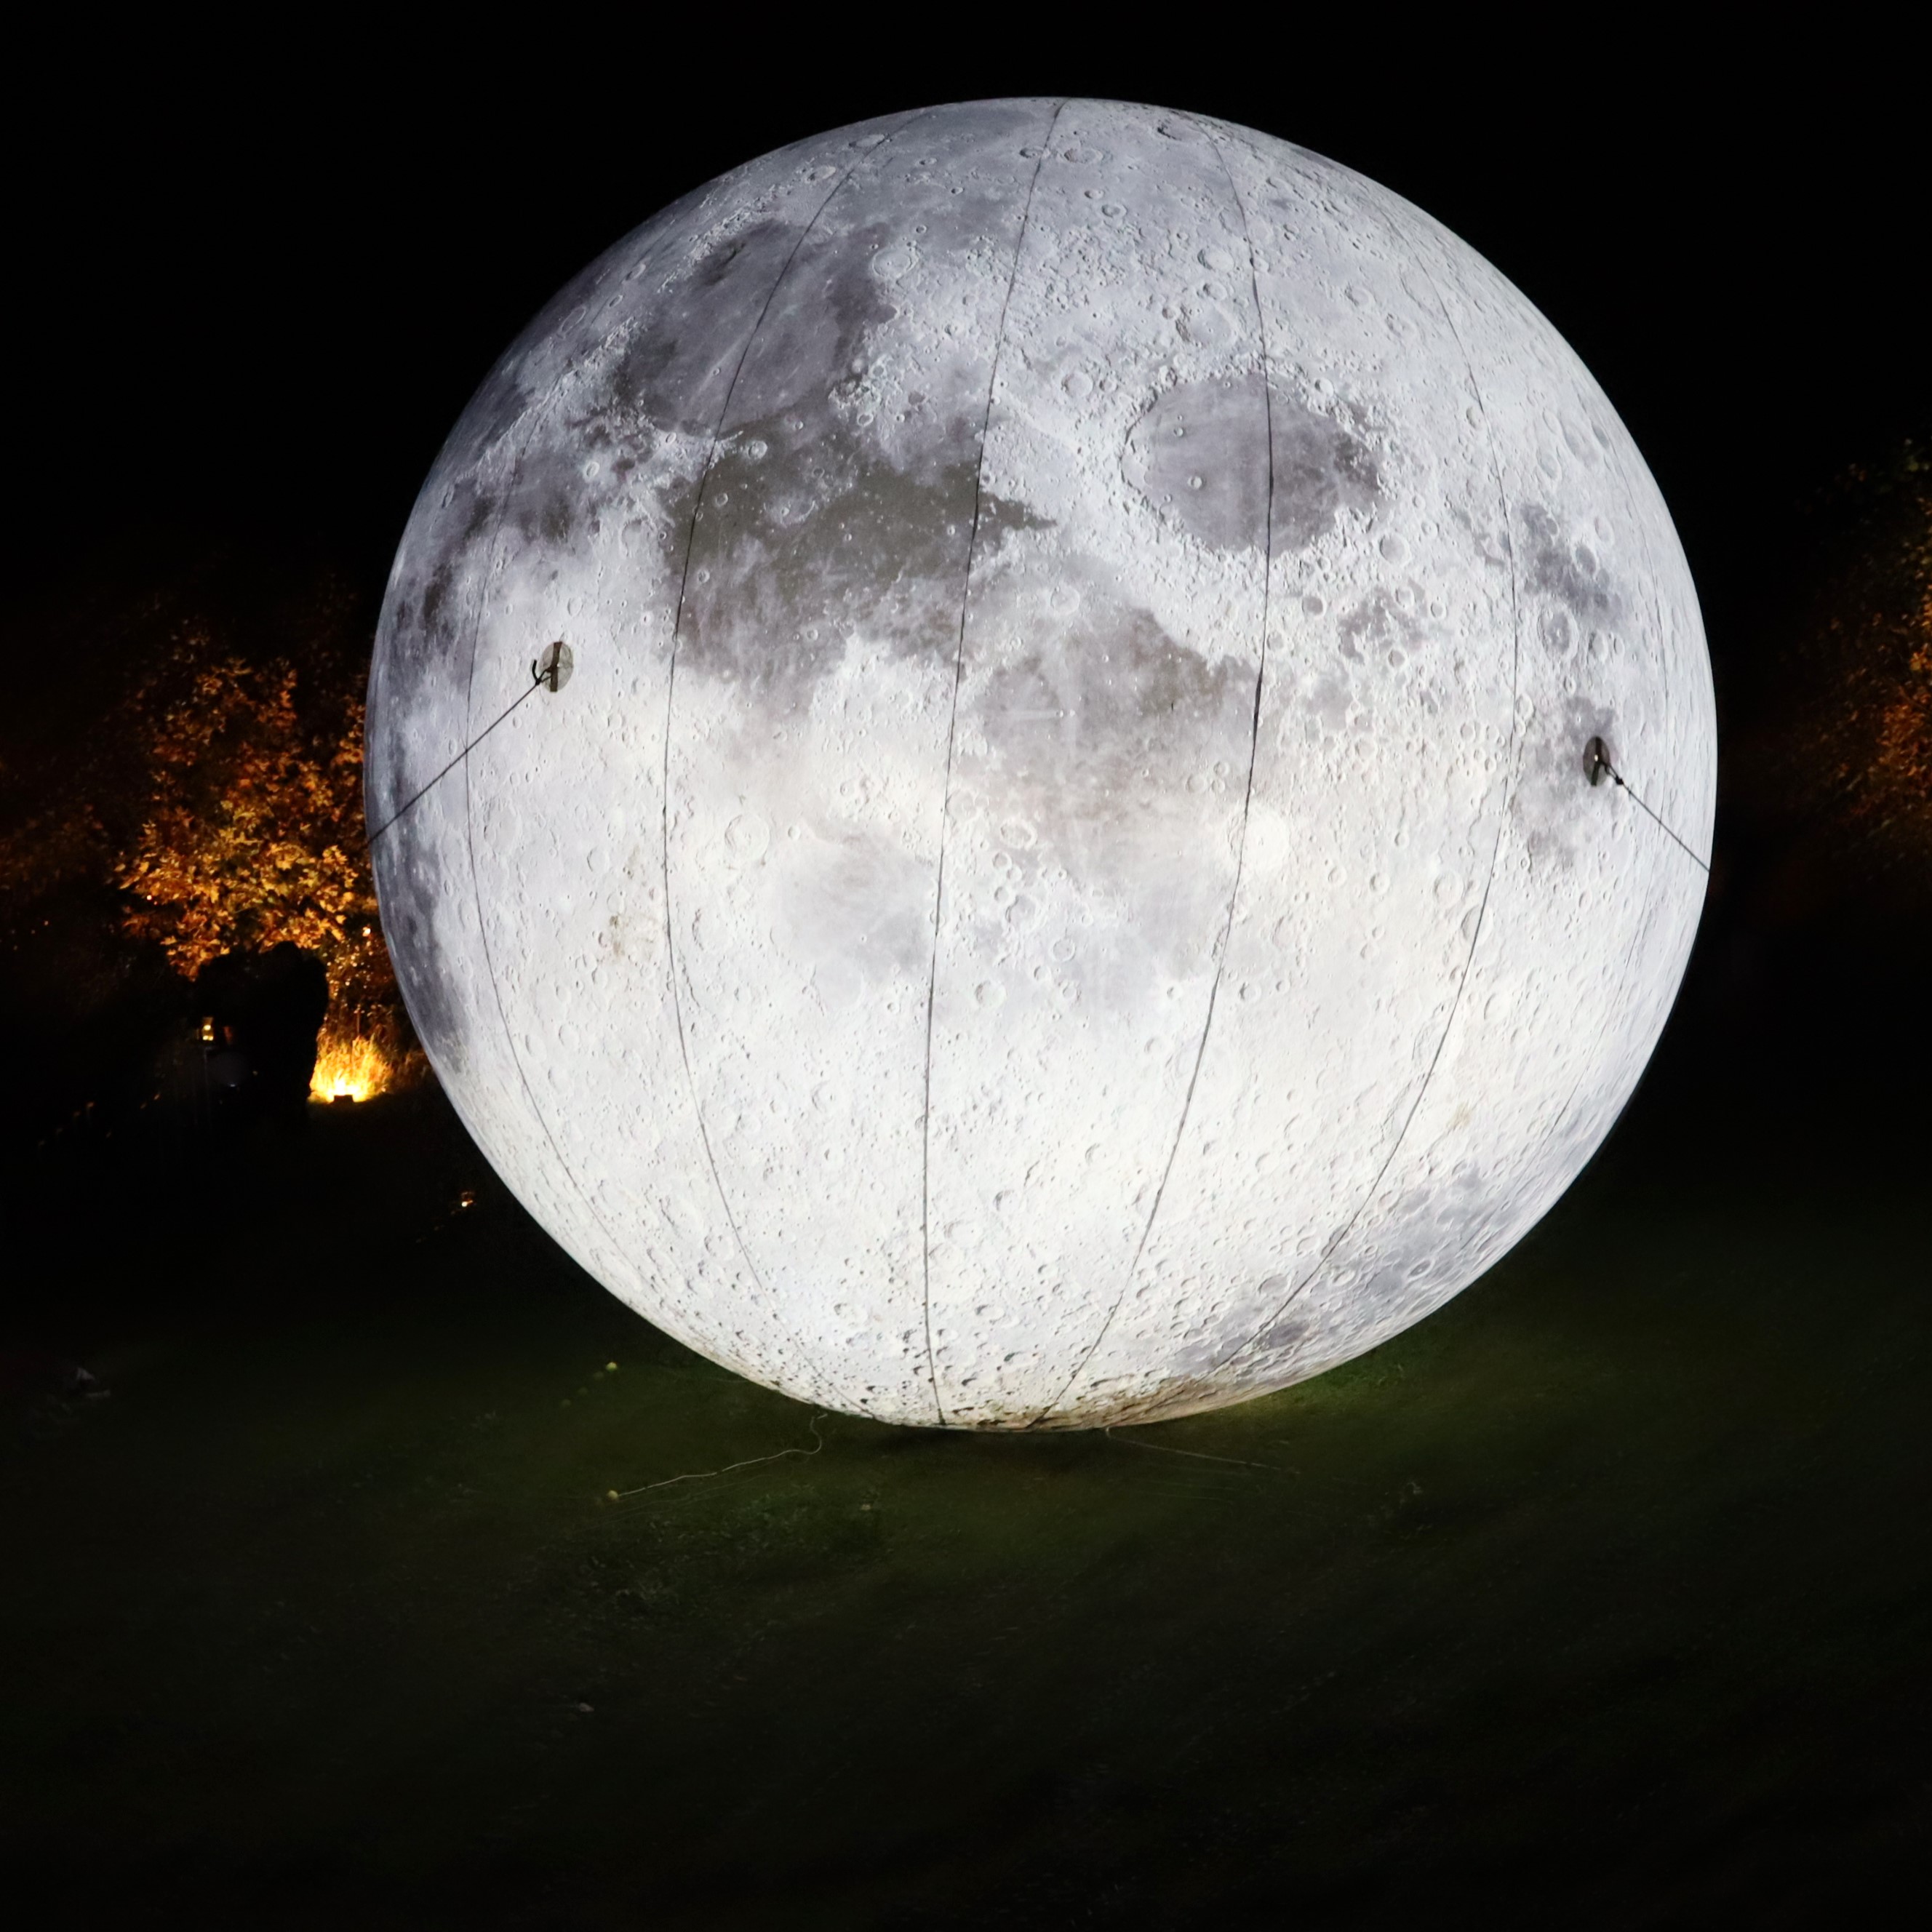 A large moon shines on the meadow in the city garden, with children in front of it and illuminated pylons in the background.